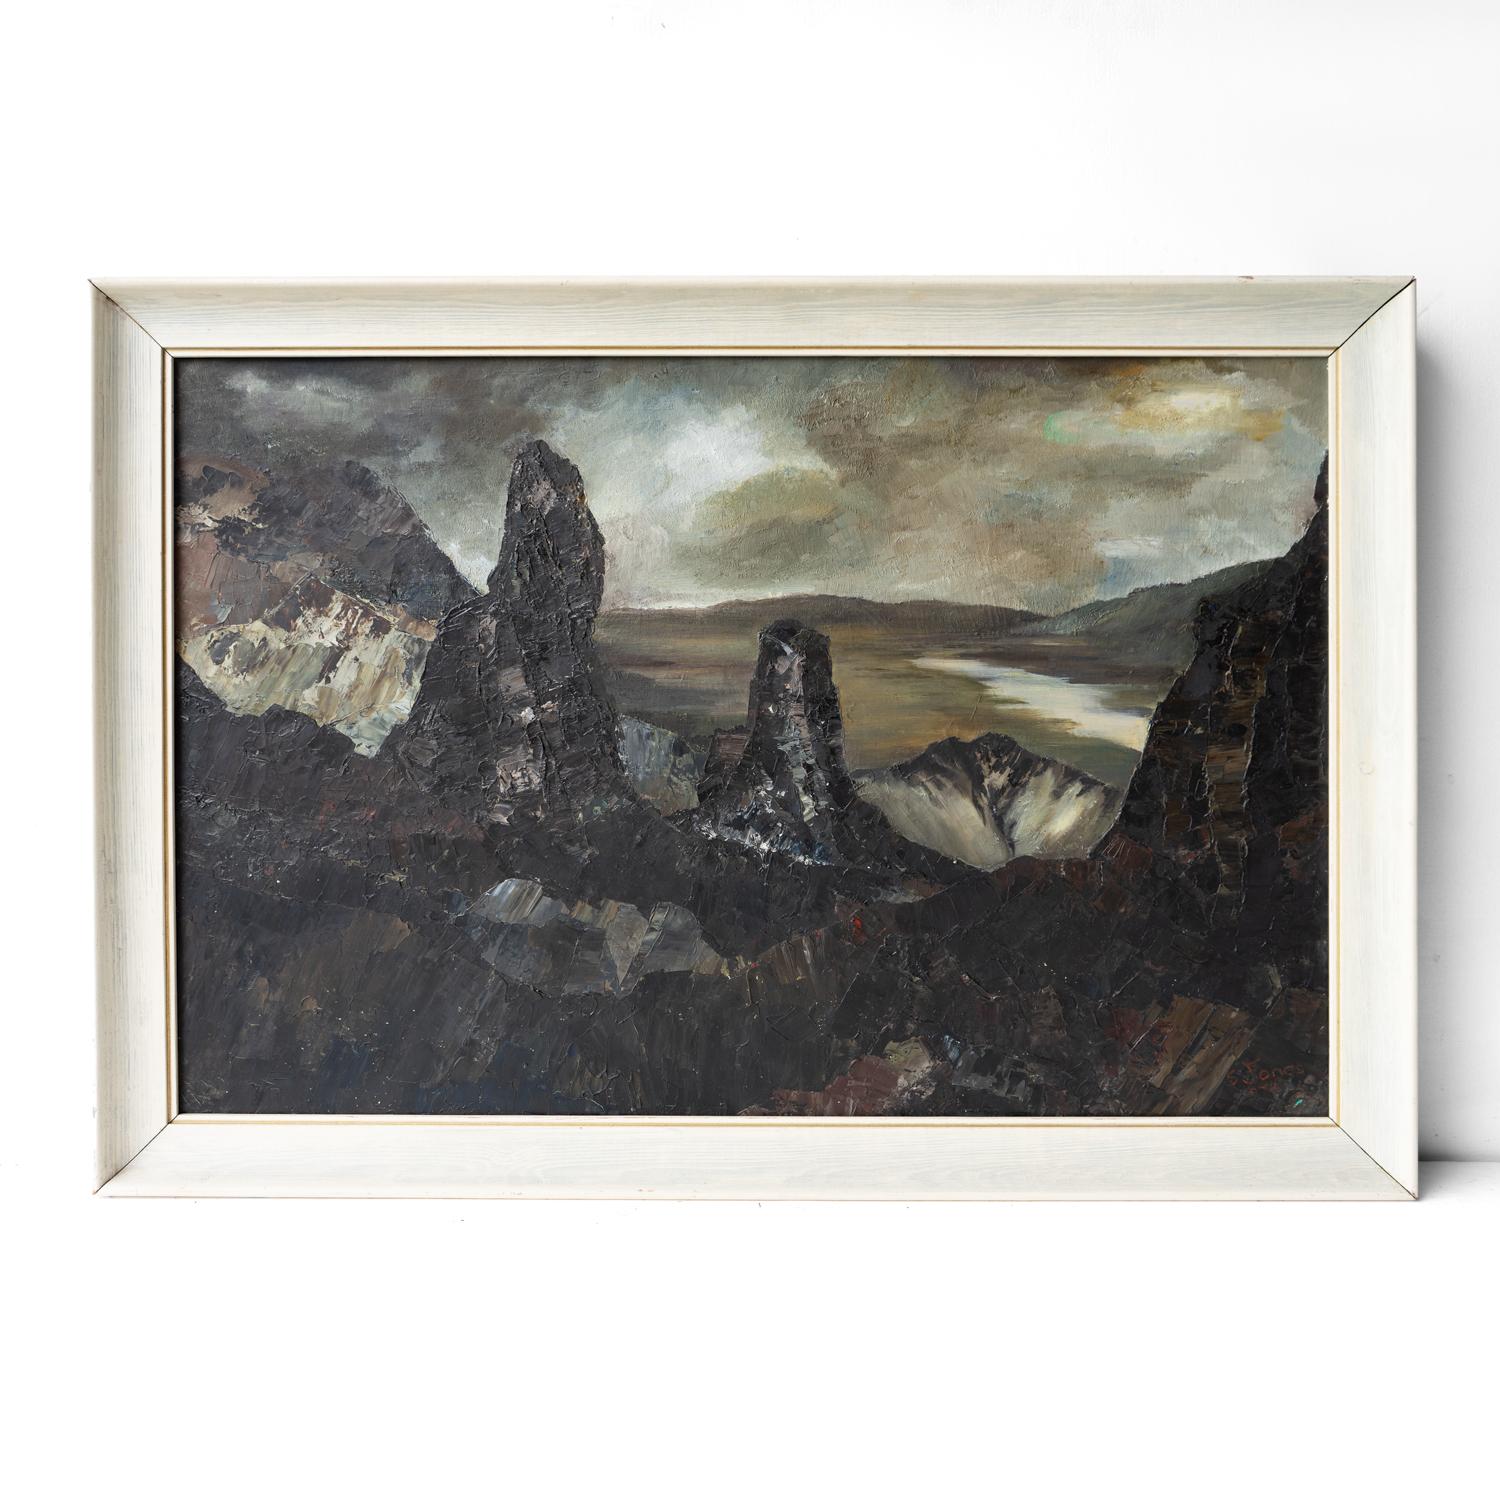 MID-CENTURY OIL ON CANVAS PAINTING 
Depicting a view from an unforgiving rocky outcrop with jagged rocks looking down onto a calmer valley with a river below.

Painted in a very atmospheric almost abstract style capturing plenty of feeling in the